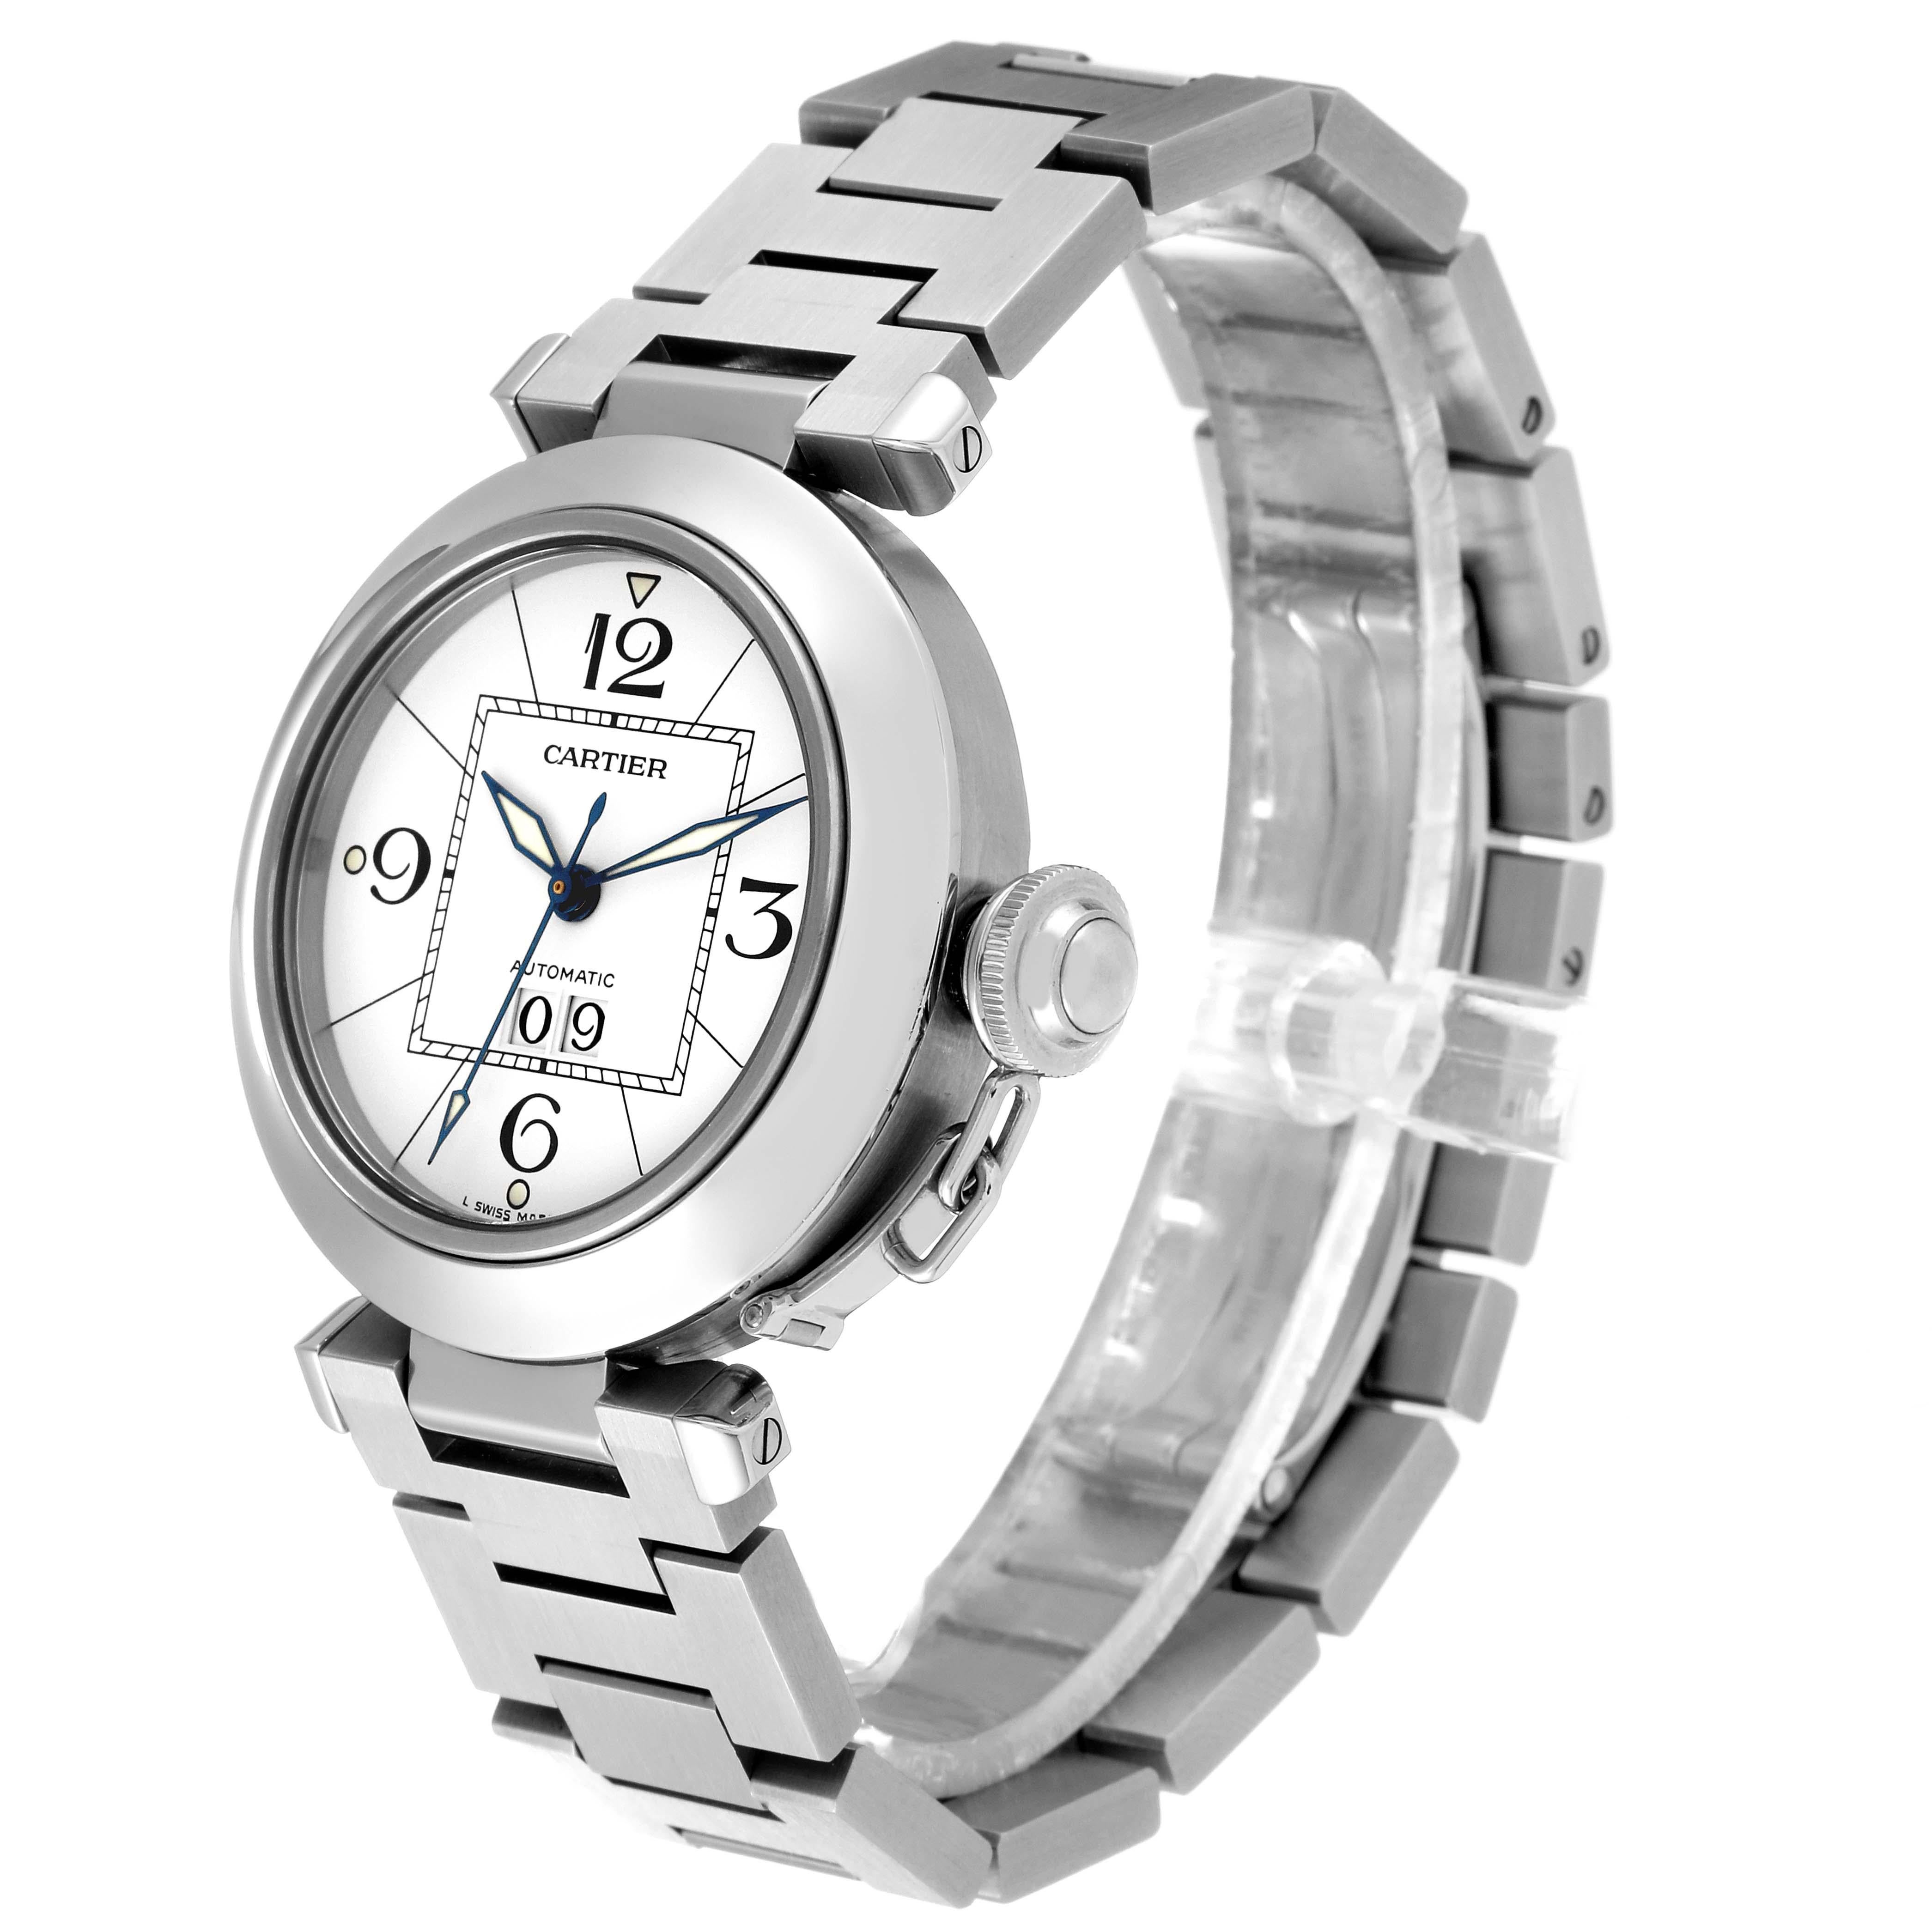 Cartier Pasha C Big Date Midsize Steel White Dial Mens Watch W31055M7 For Sale 1